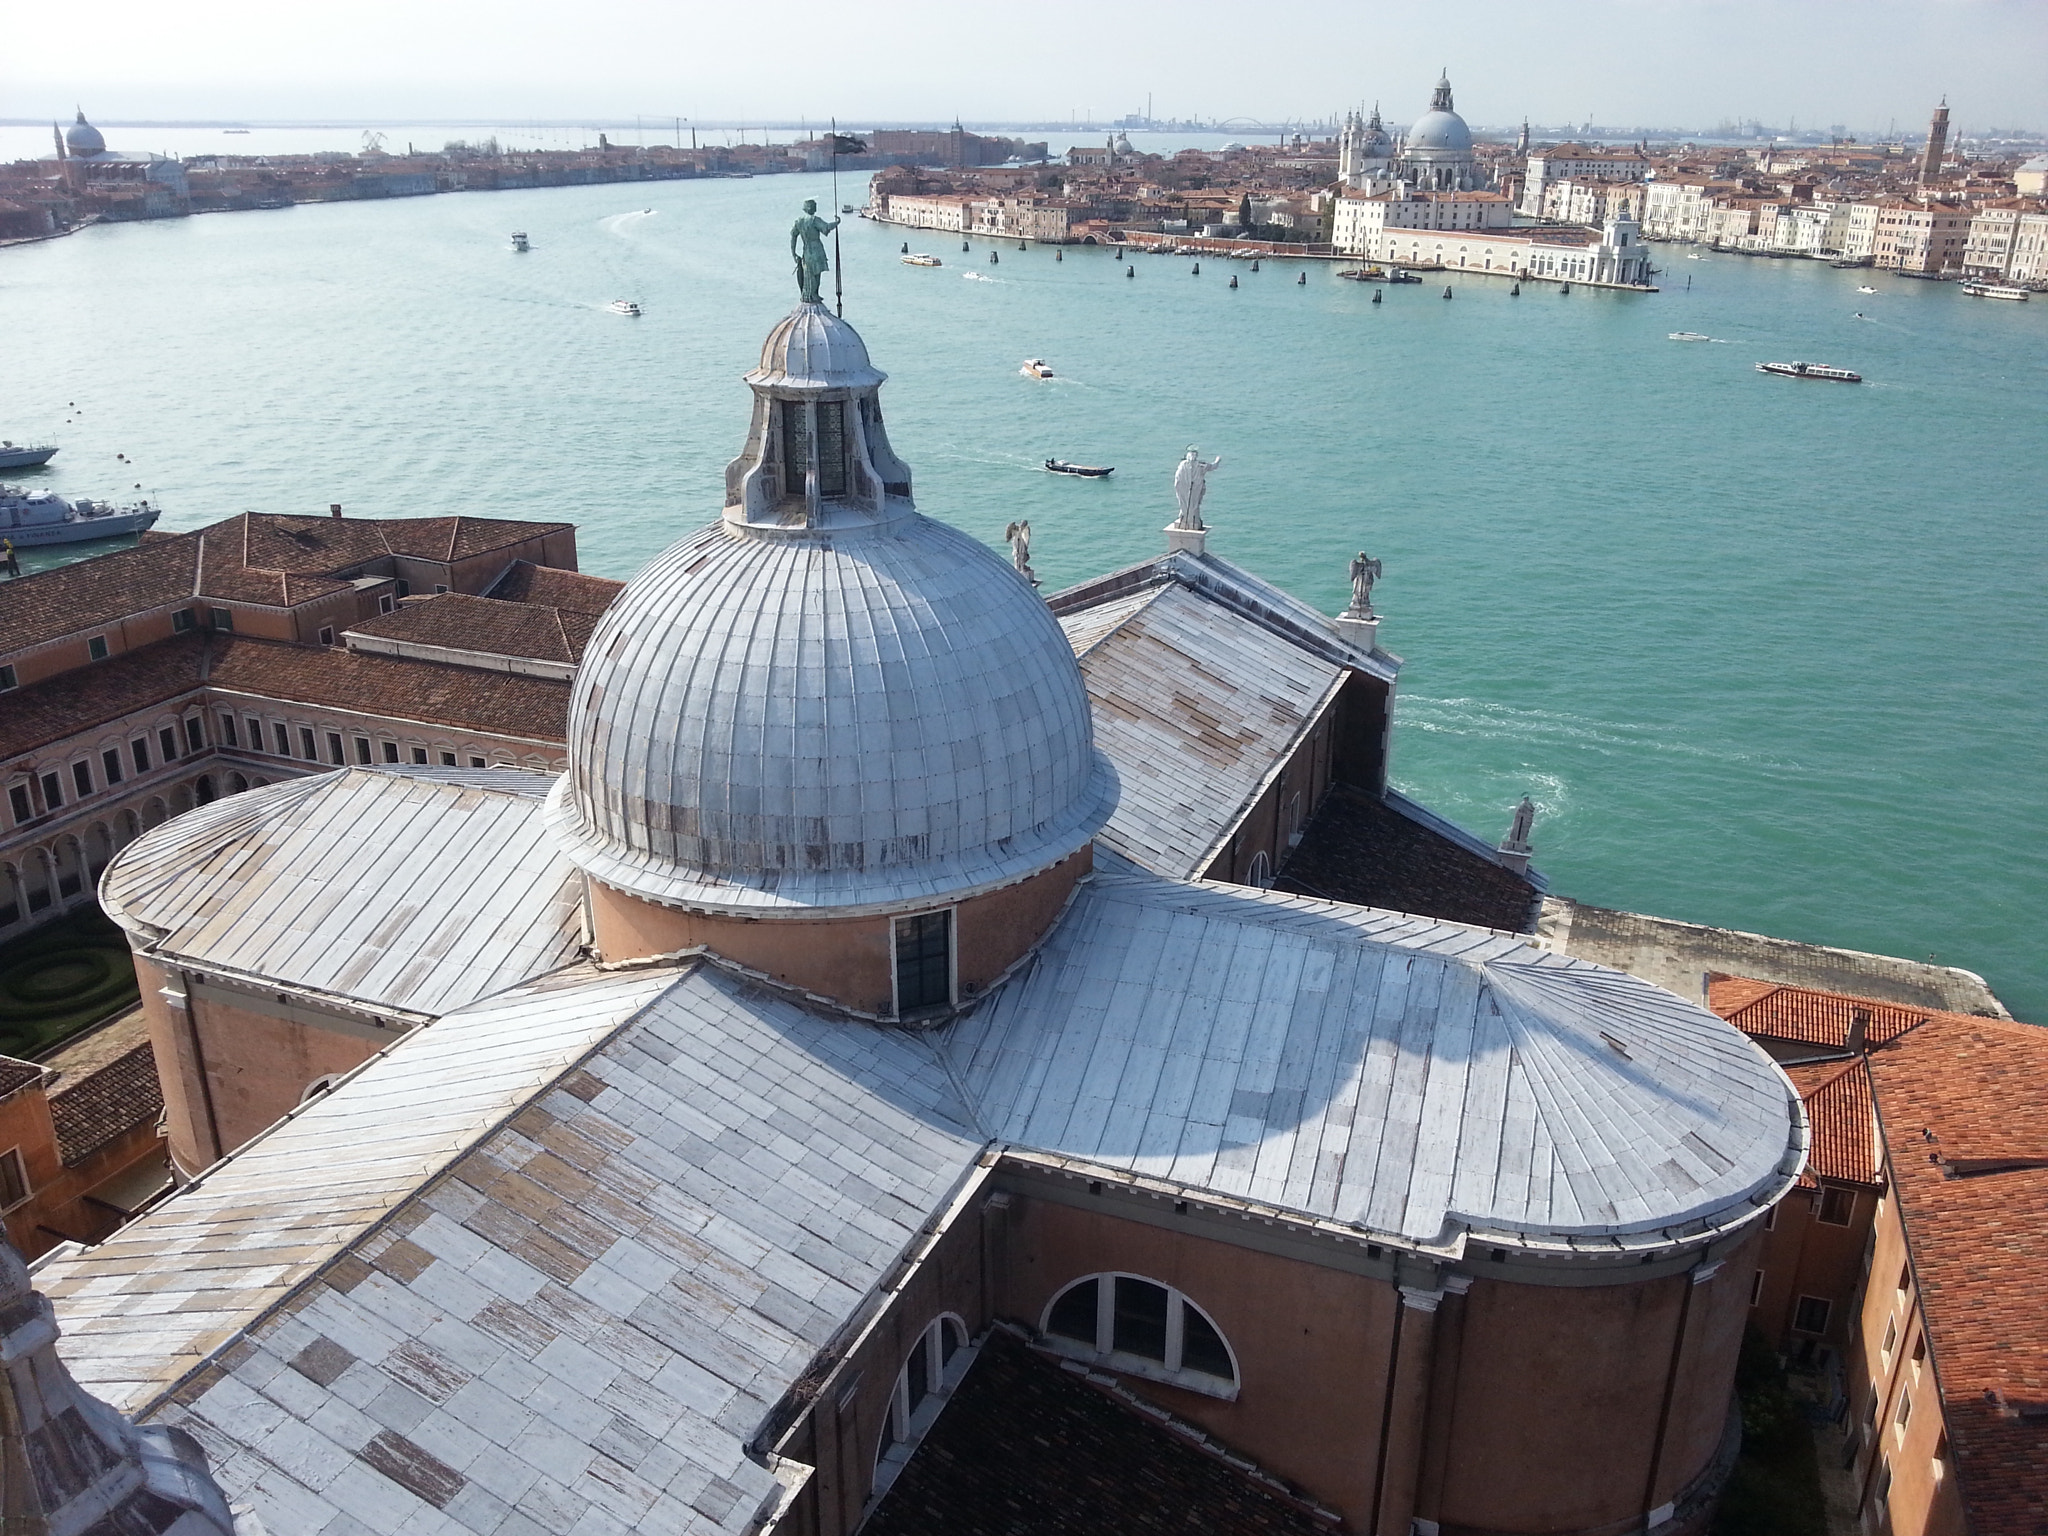 Samsung GT-I8750 sample photo. The view above le zitelle on venice photography